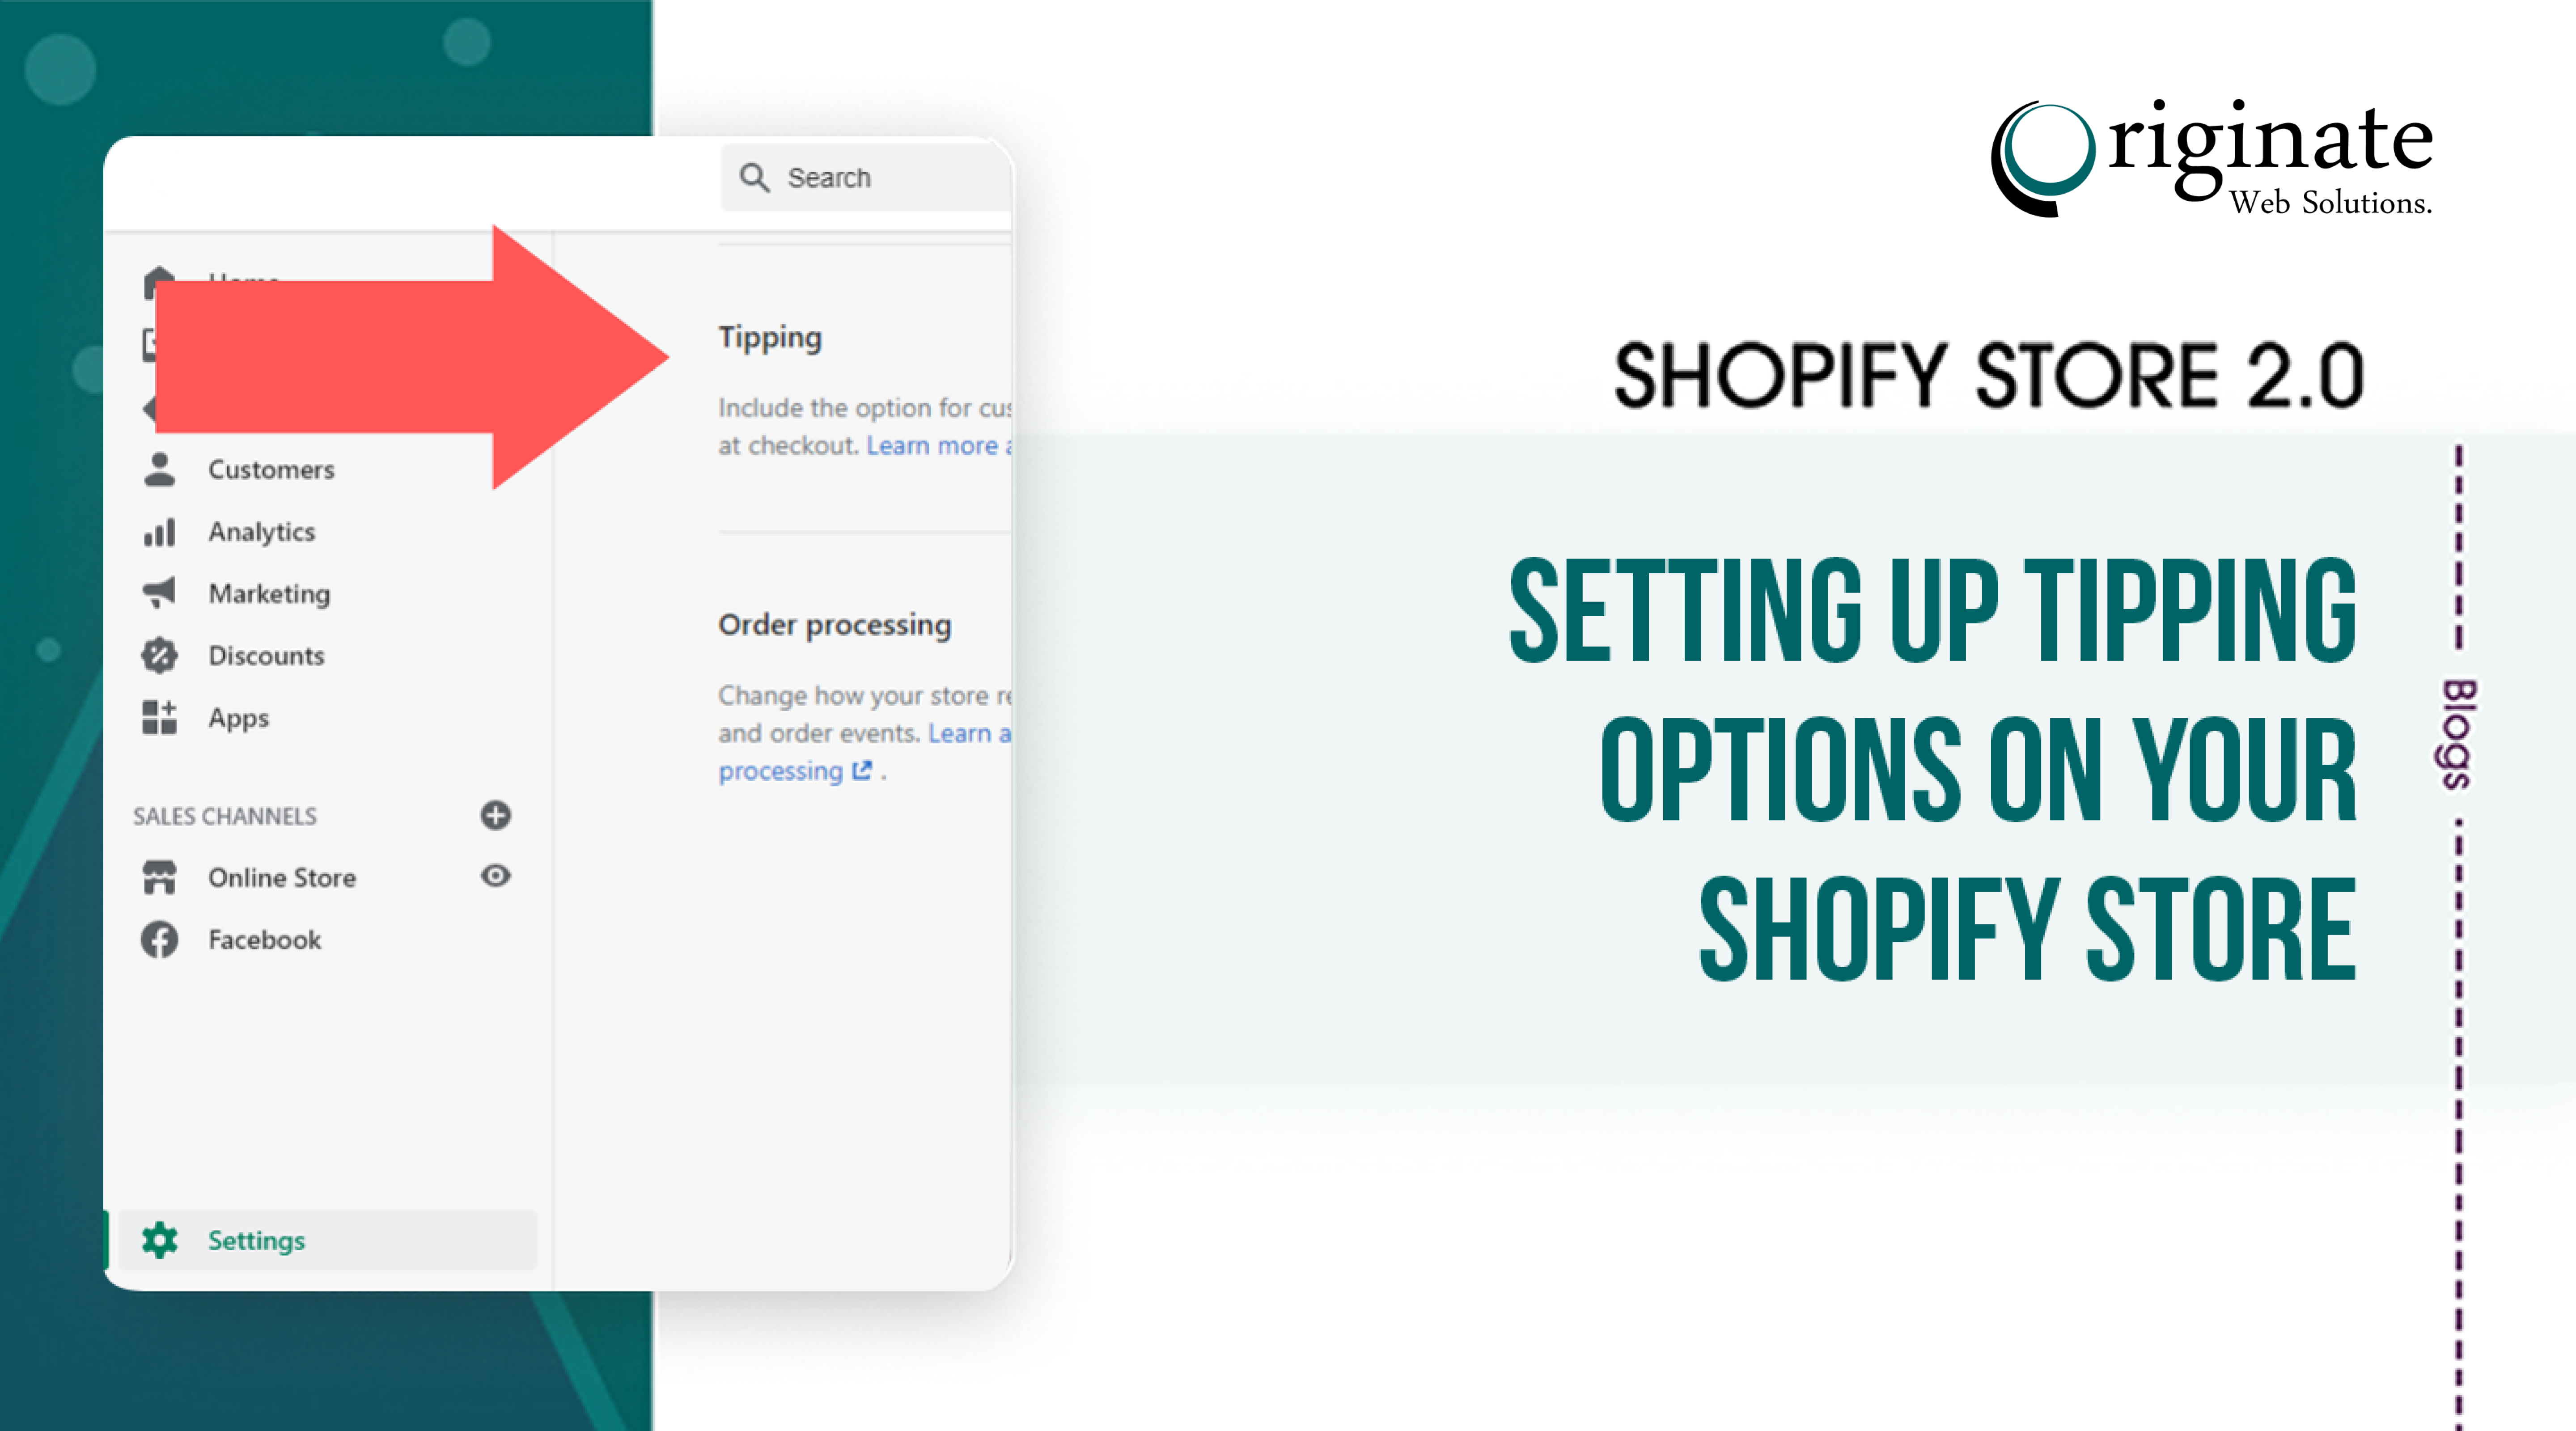 Setting up Tipping Options on Your Shopify Store